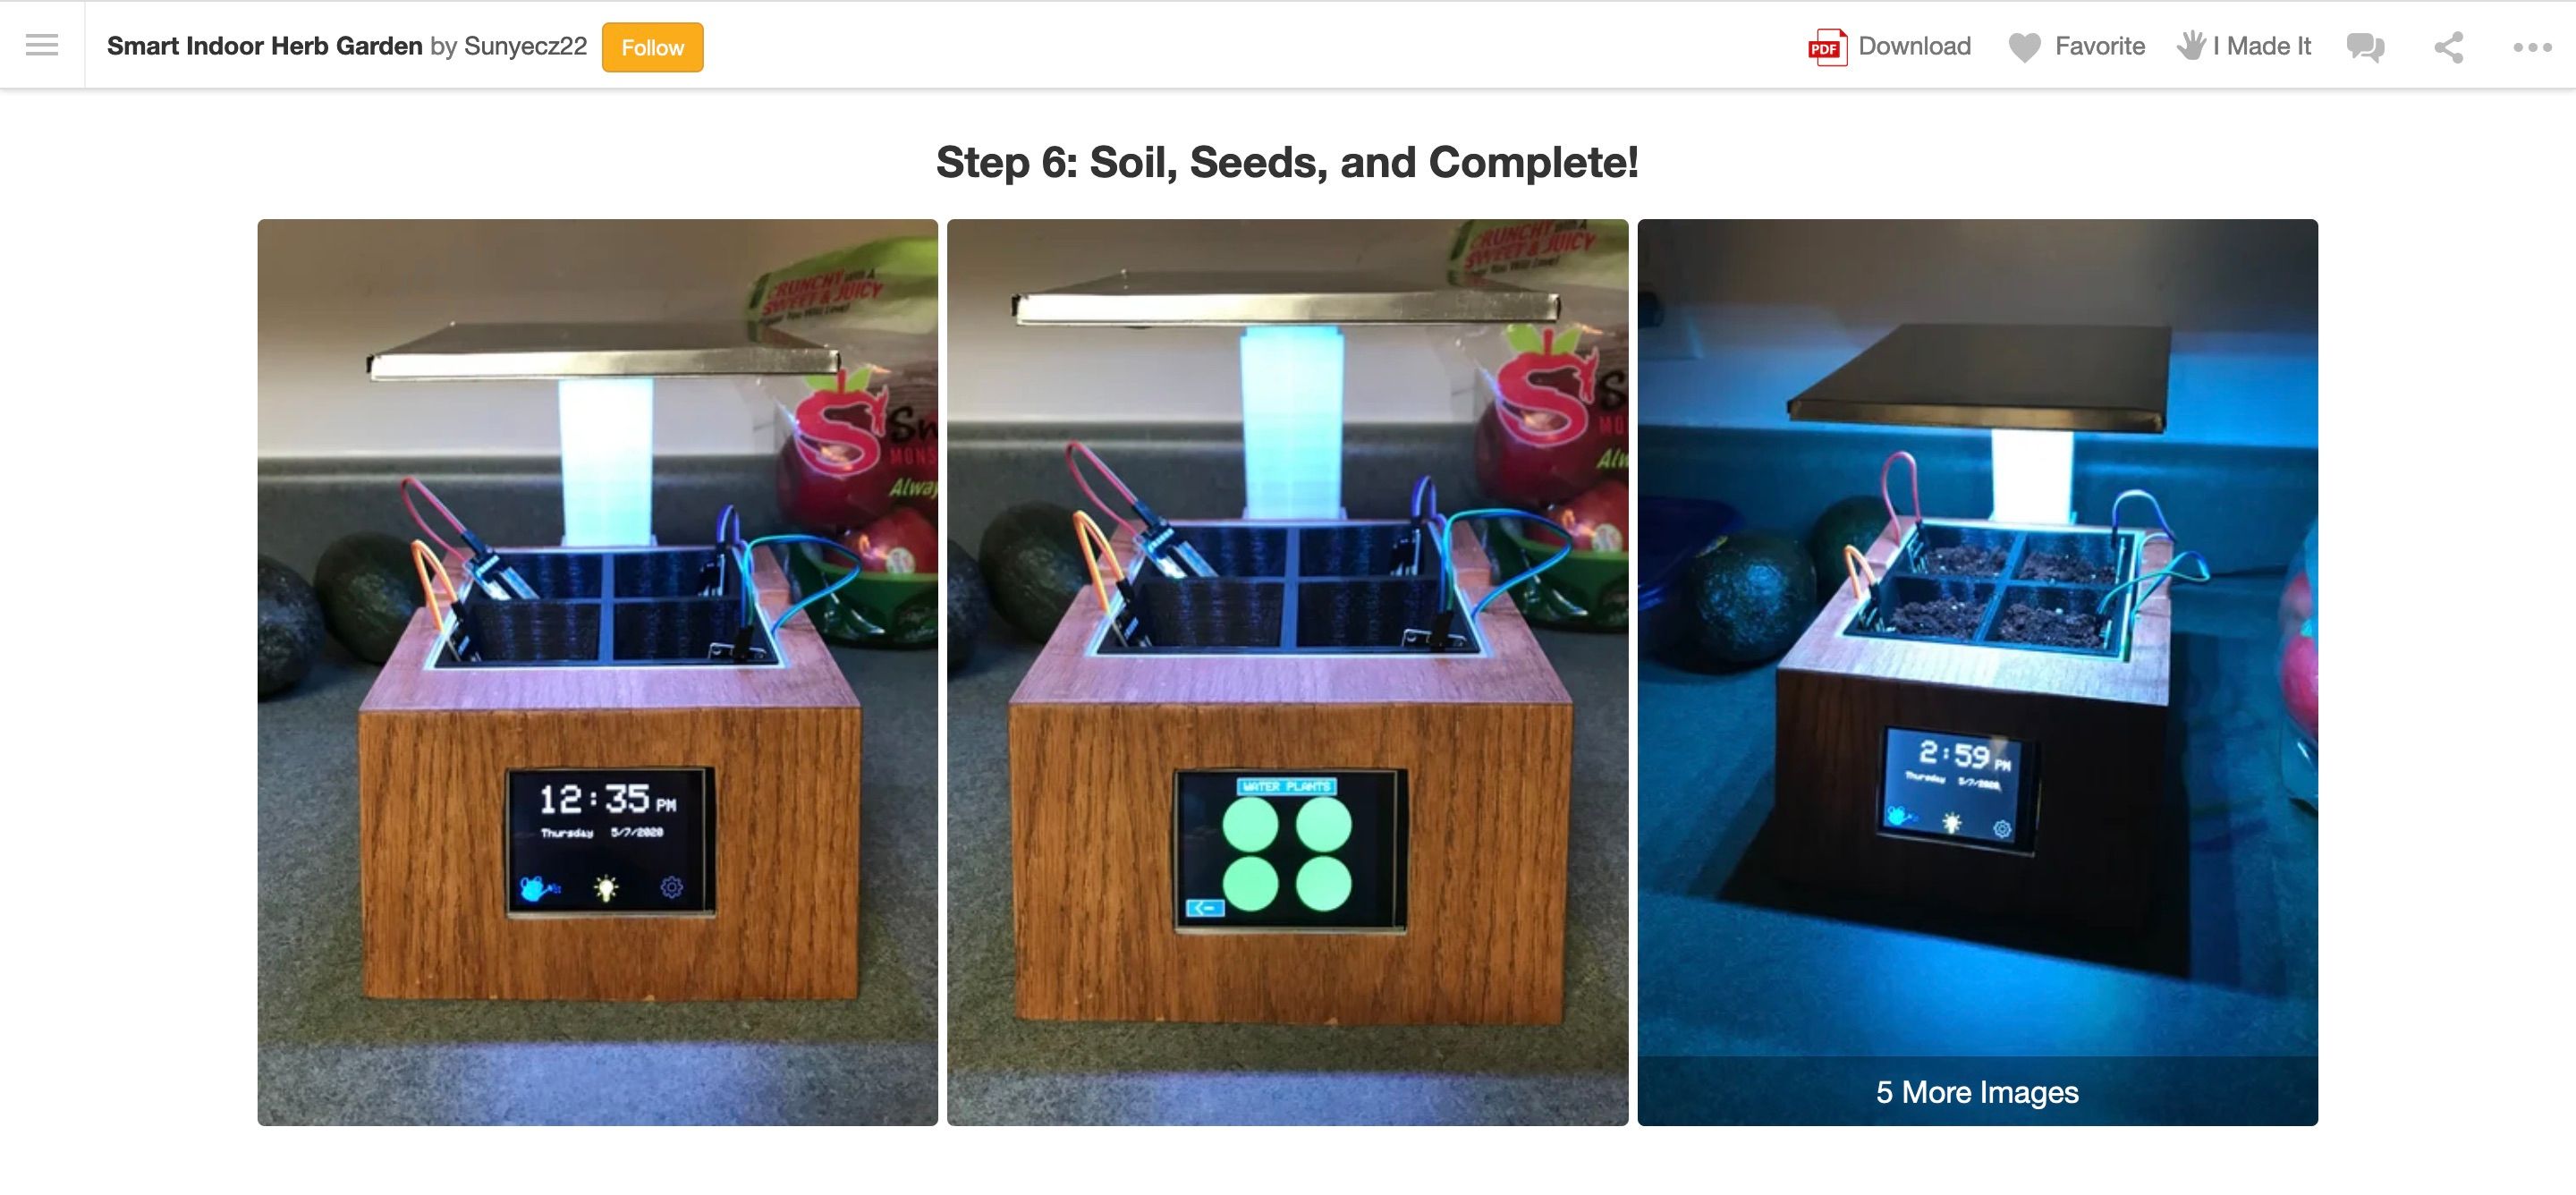 A screenshot showing 3 front-on images of a small desktop garden with an overhead light